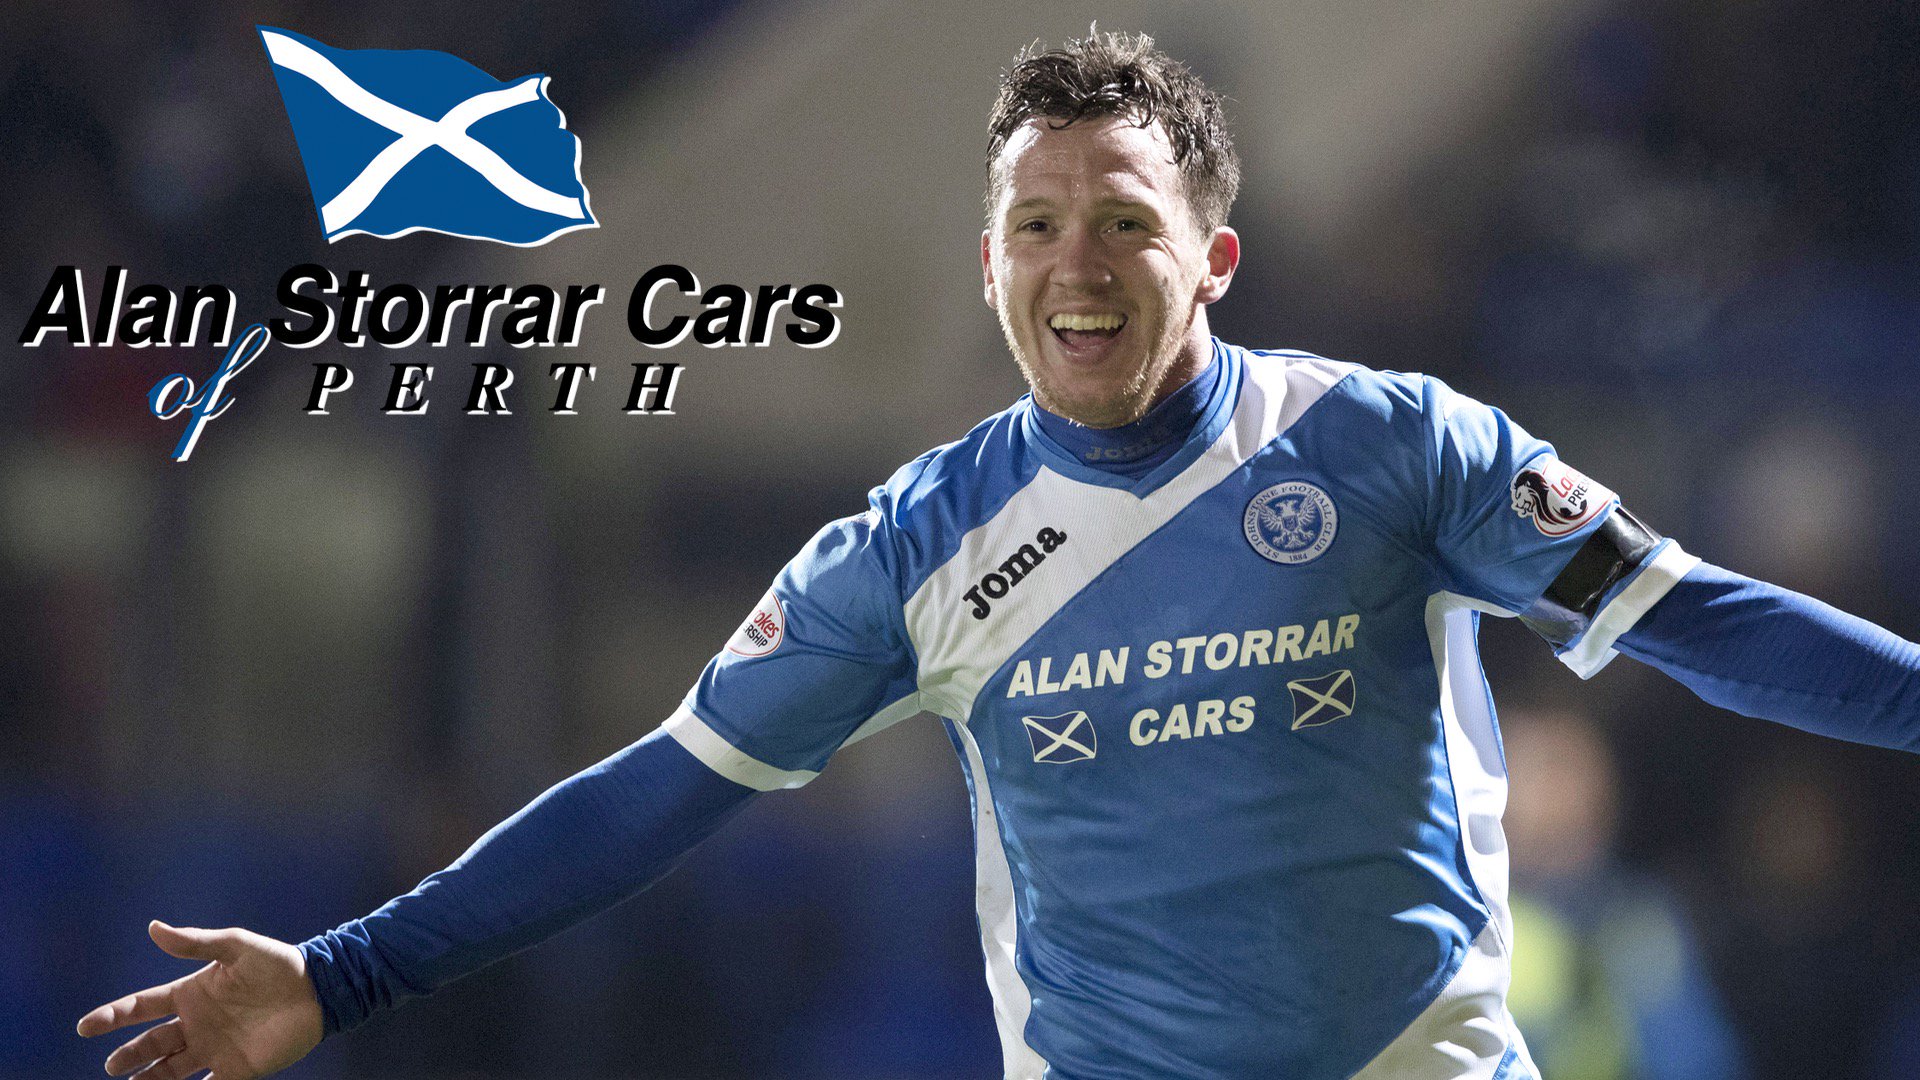 Alan Storrar Cars on Twitter: "RT if you believe Danny Swanson should be  the @Storrarcars St. Johnstone Player of the Year 2016/17! #SJFC  https://t.co/dEZQNdha4T" / Twitter